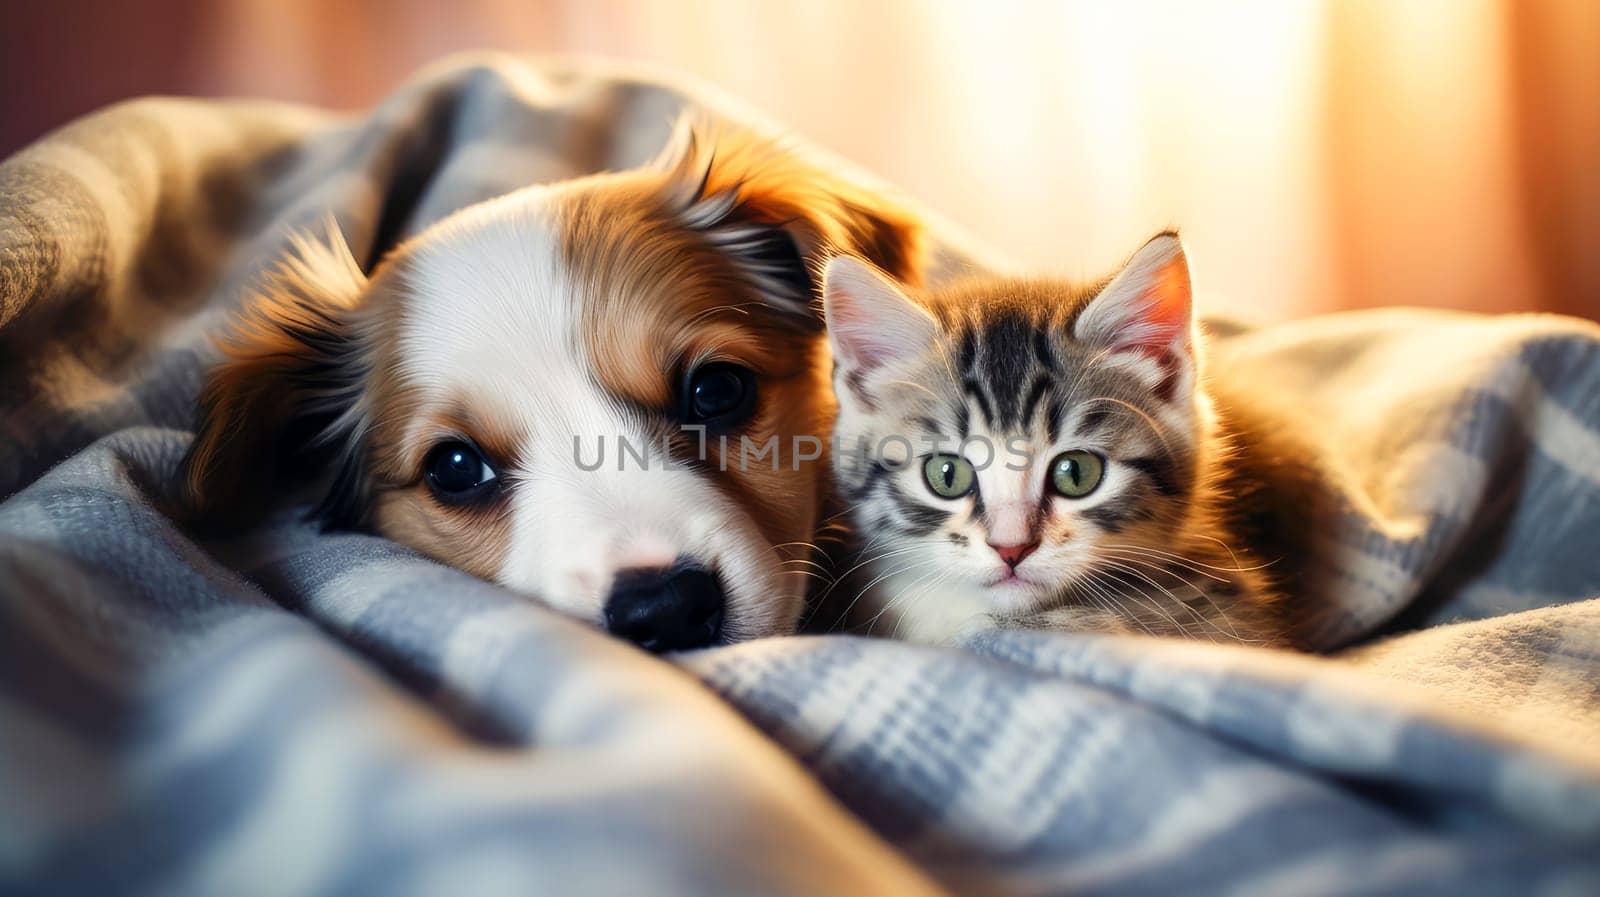 A happy, contented and cute kitten and puppy lie comfortably together under a blanket on the bed. Advertising holidays for animals, travel agency, pet store, modern training and courses, animators, holiday goods.